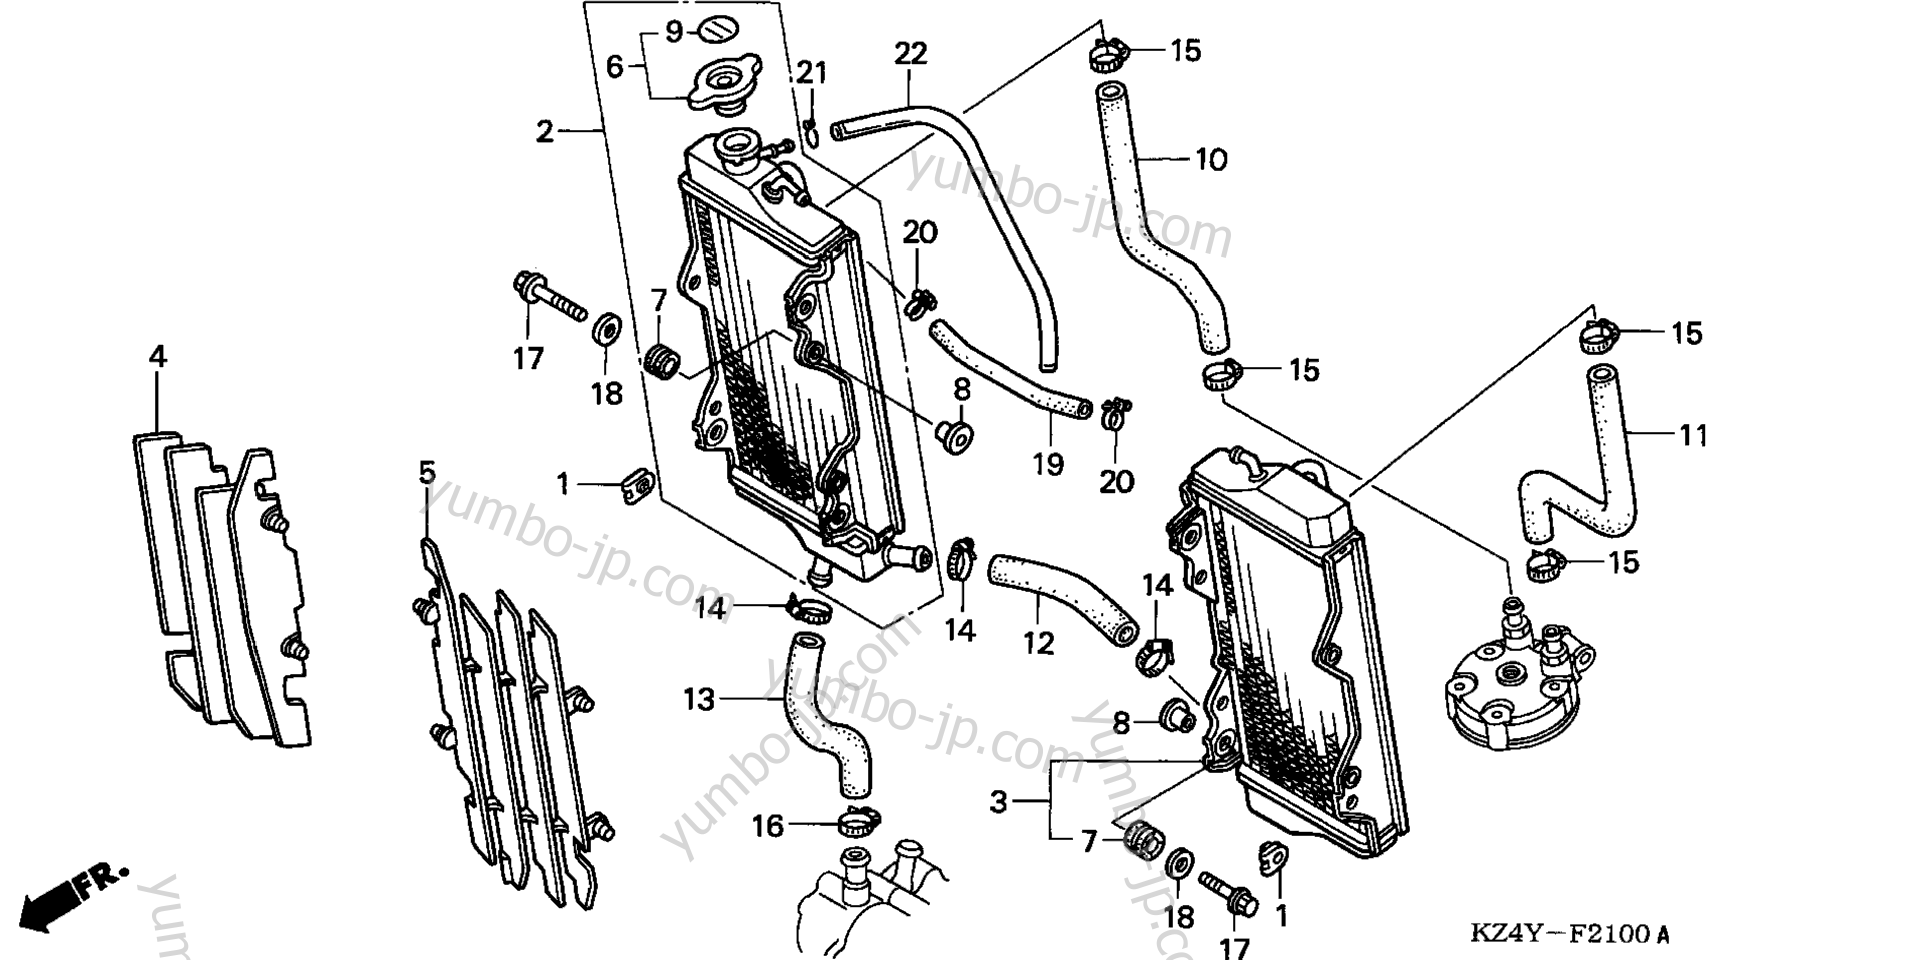 RADIATOR for motorcycles HONDA CR125R A 2001 year